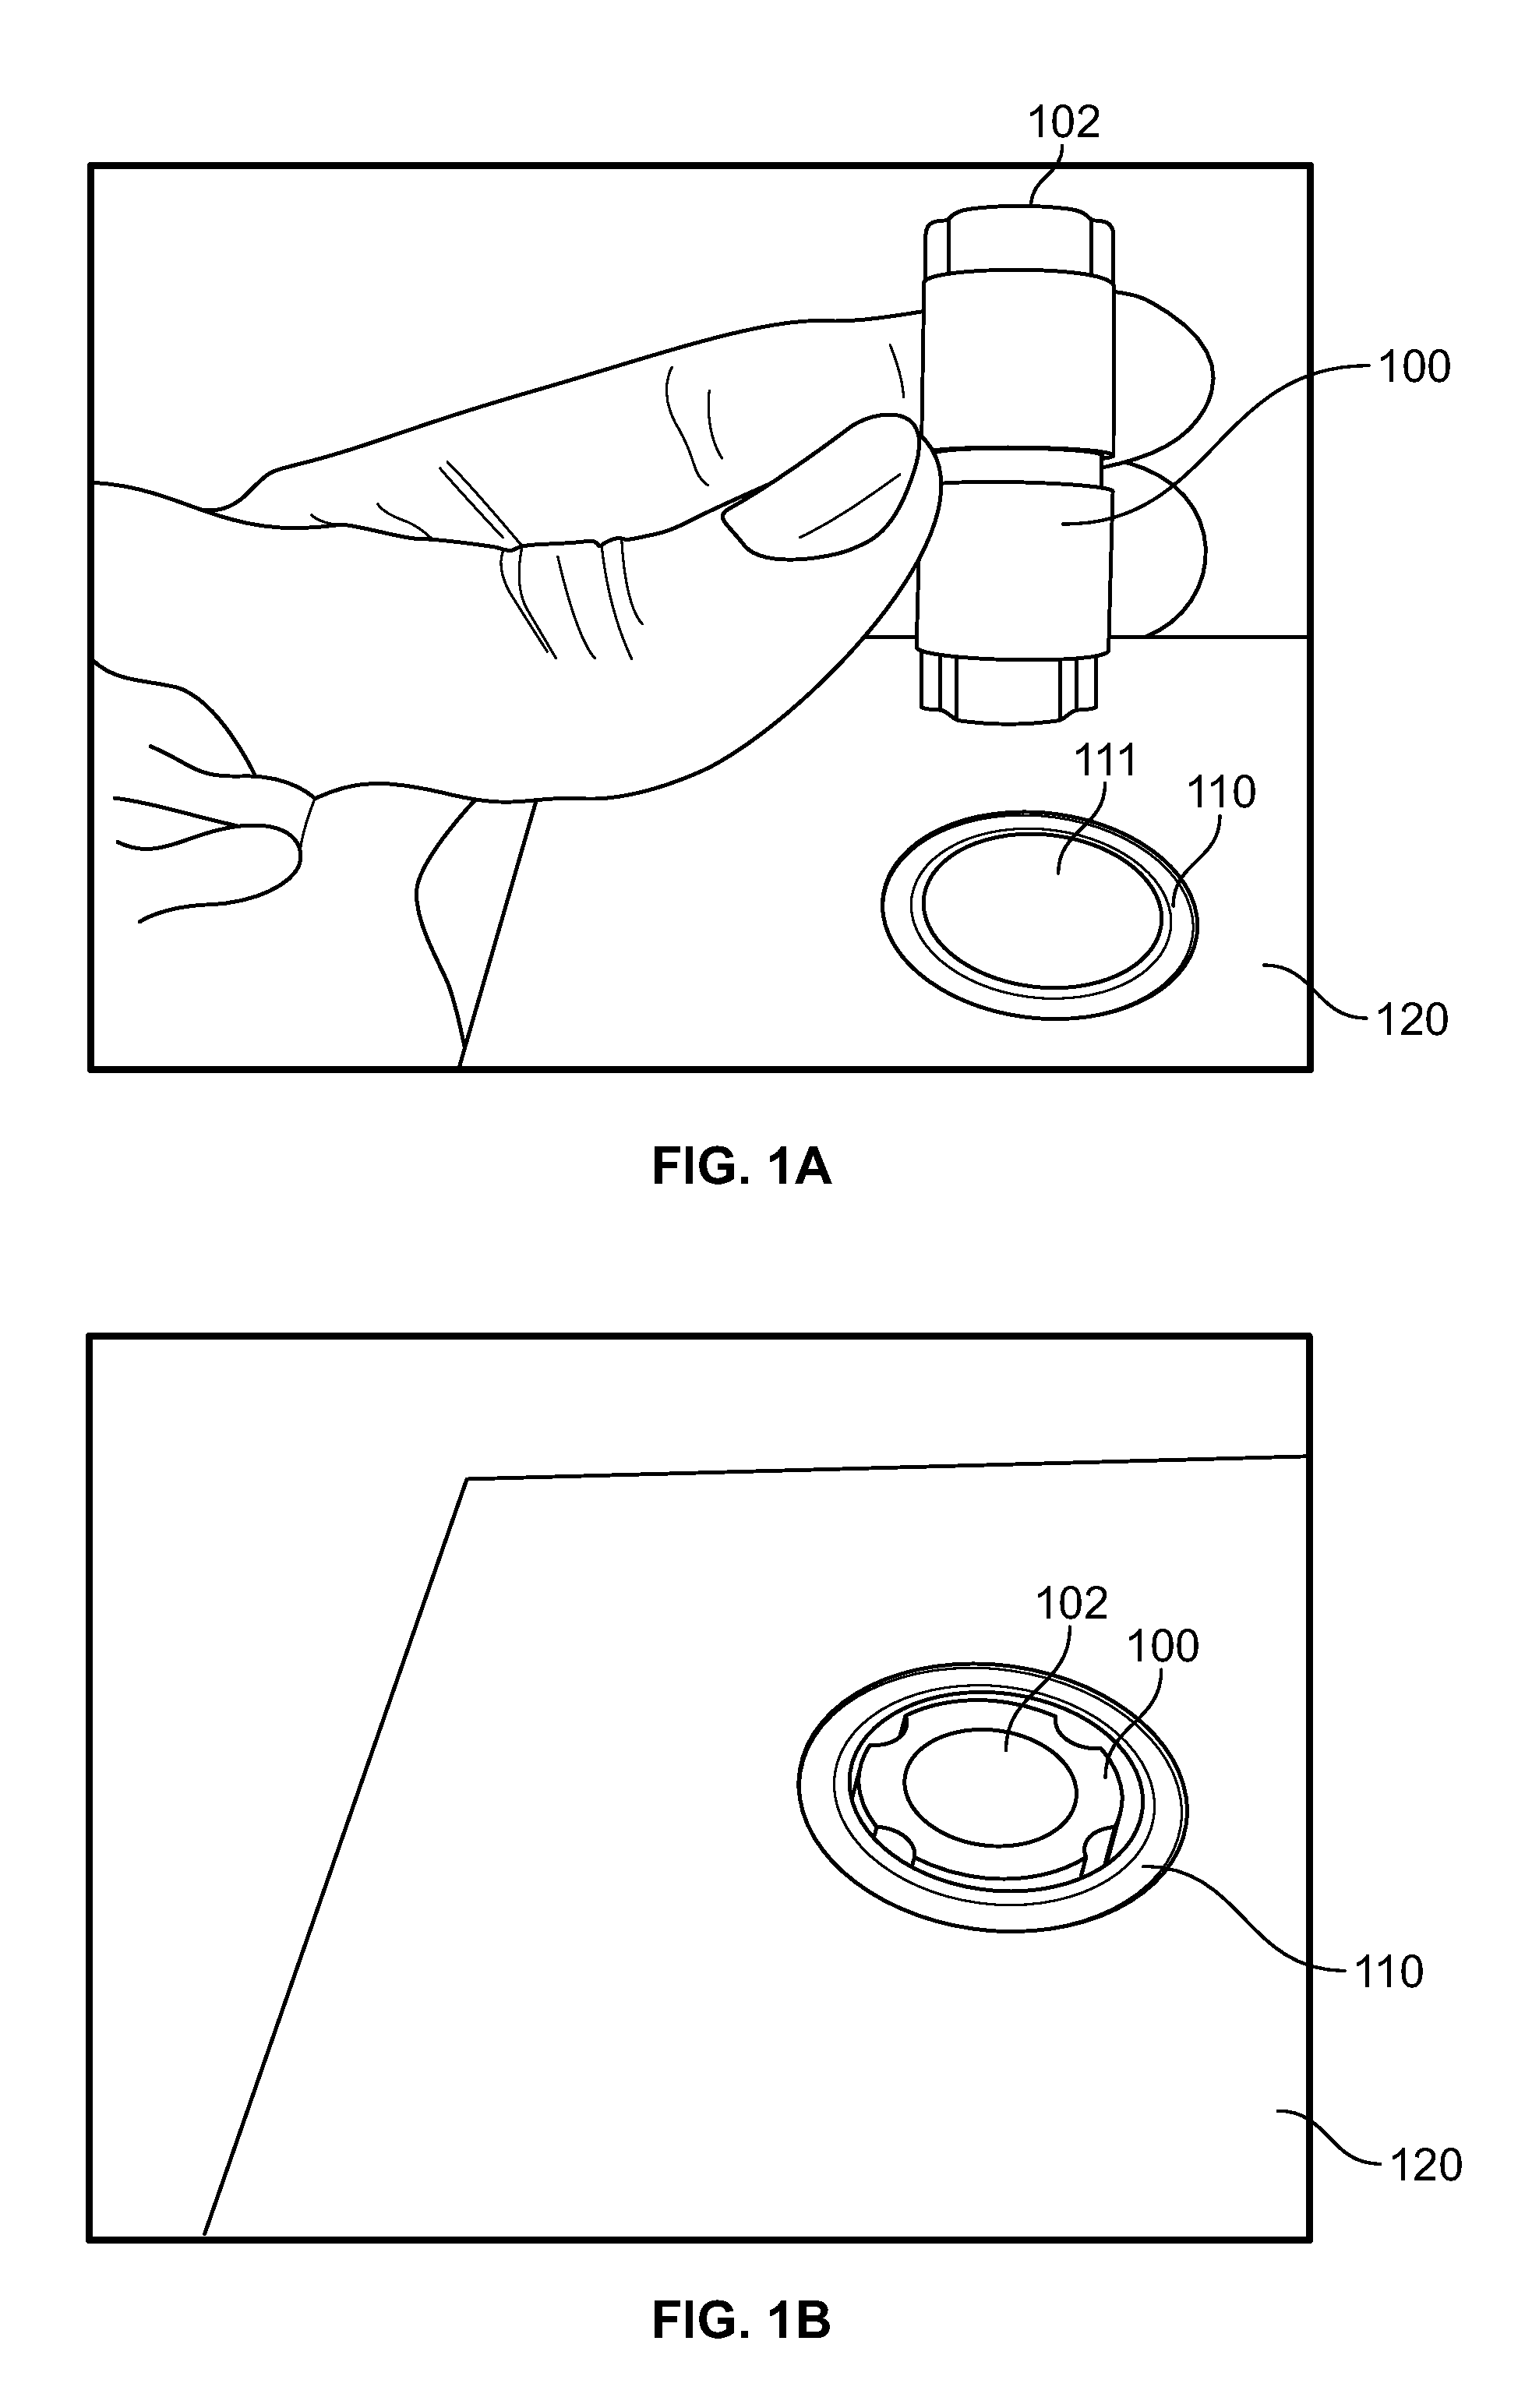 Method and apparatus for friction stir welding tube ends for a heat exchanger